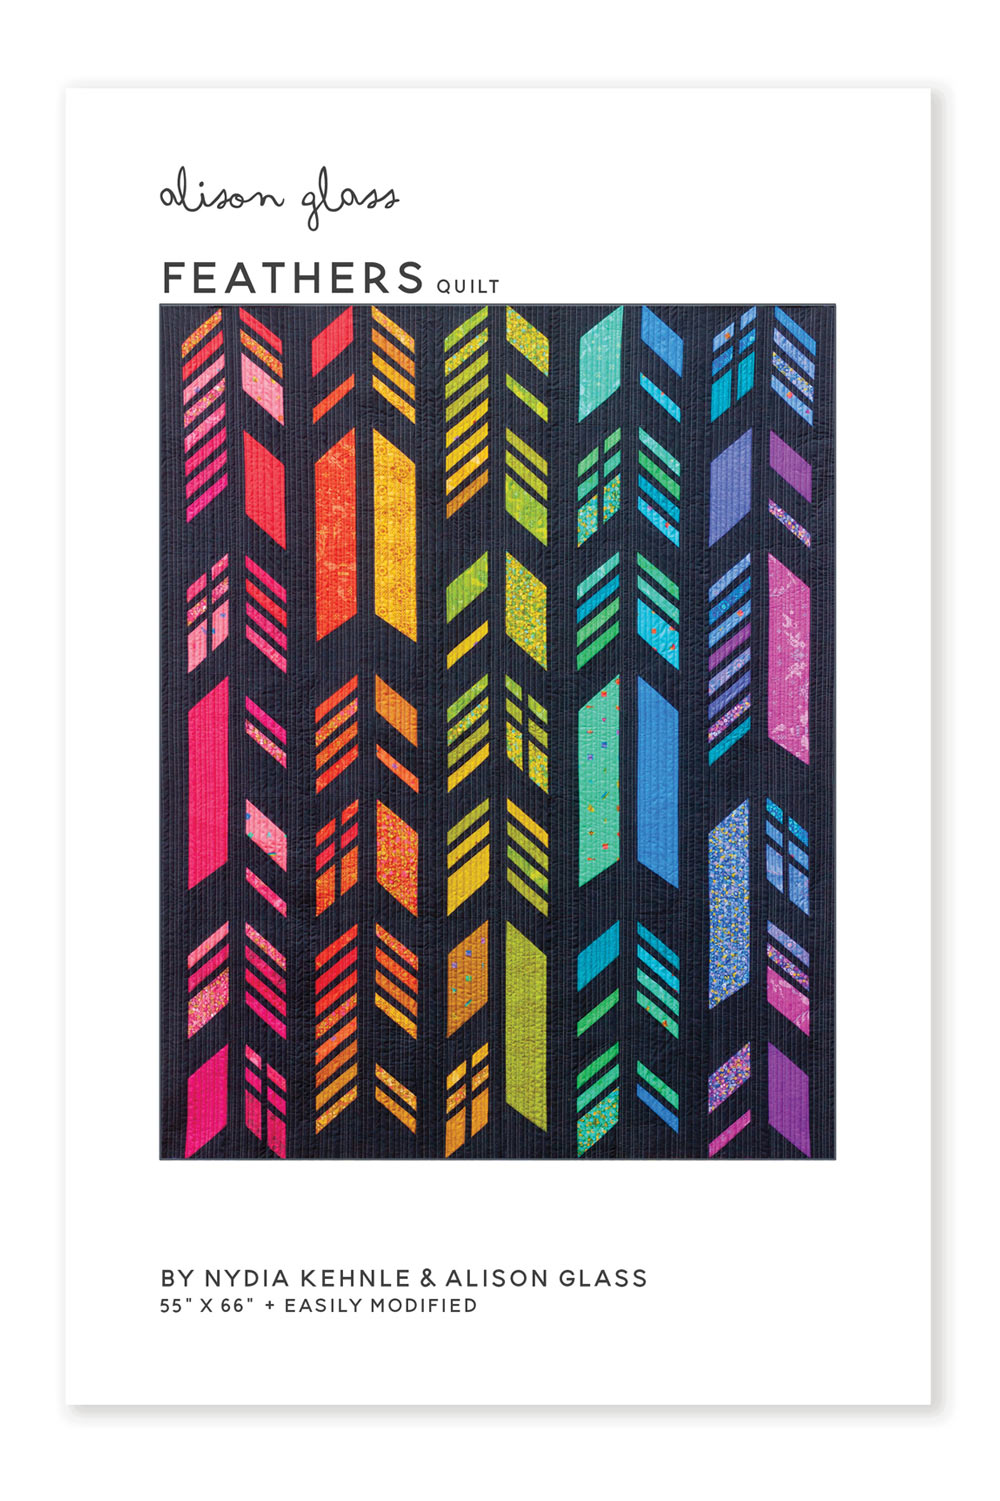 Alison Glass Feathers Quilt